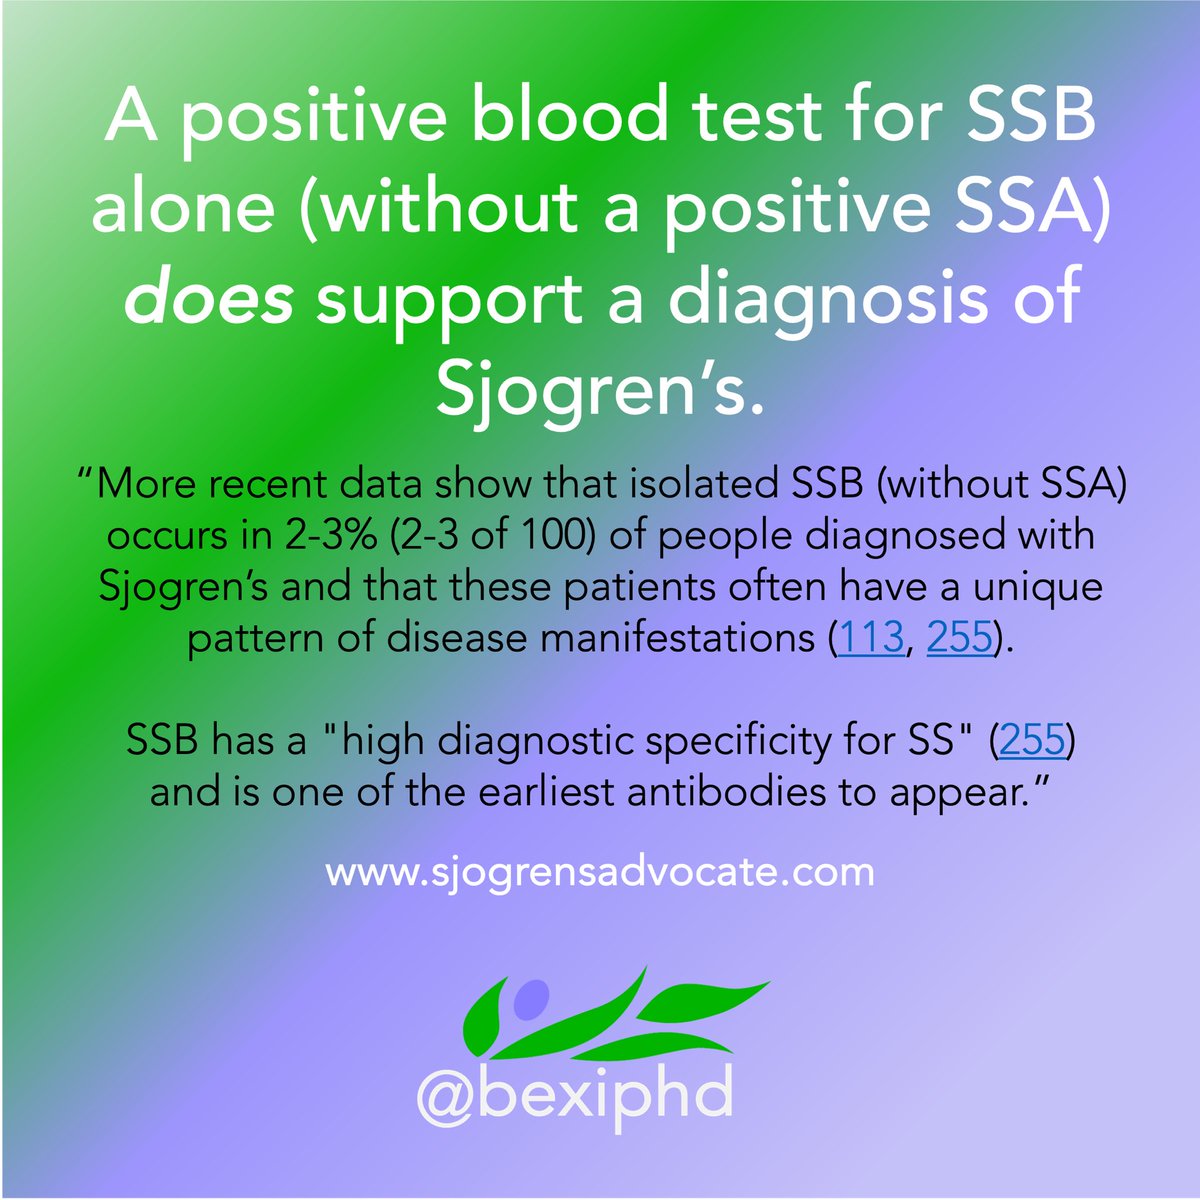 April is Sjogren's (SHOW-grins) awareness month.  

There are lots of myths about Sjogren's in the medical community and public that are barriers to diagnosis & care.

Please help me advocate for Sjogren's by interacting with, commenting on, & sharing my posts.

#ThisIsSjögrens